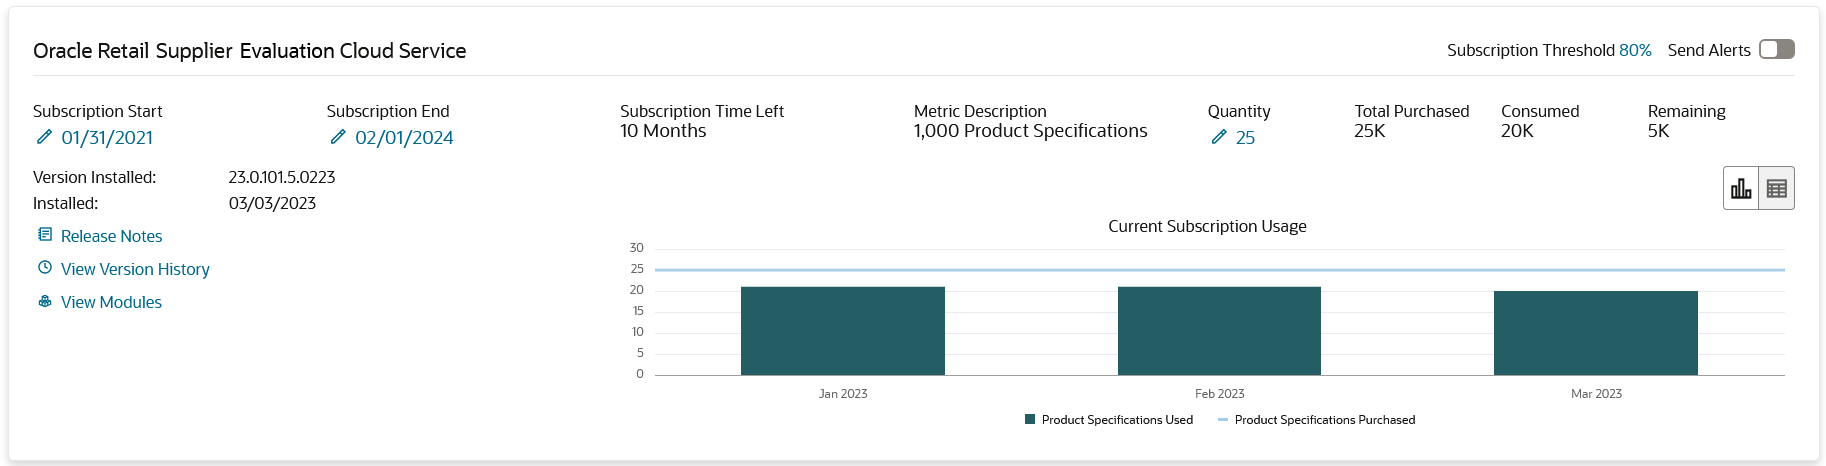 Supplier Evaluation Subscription Metric Report